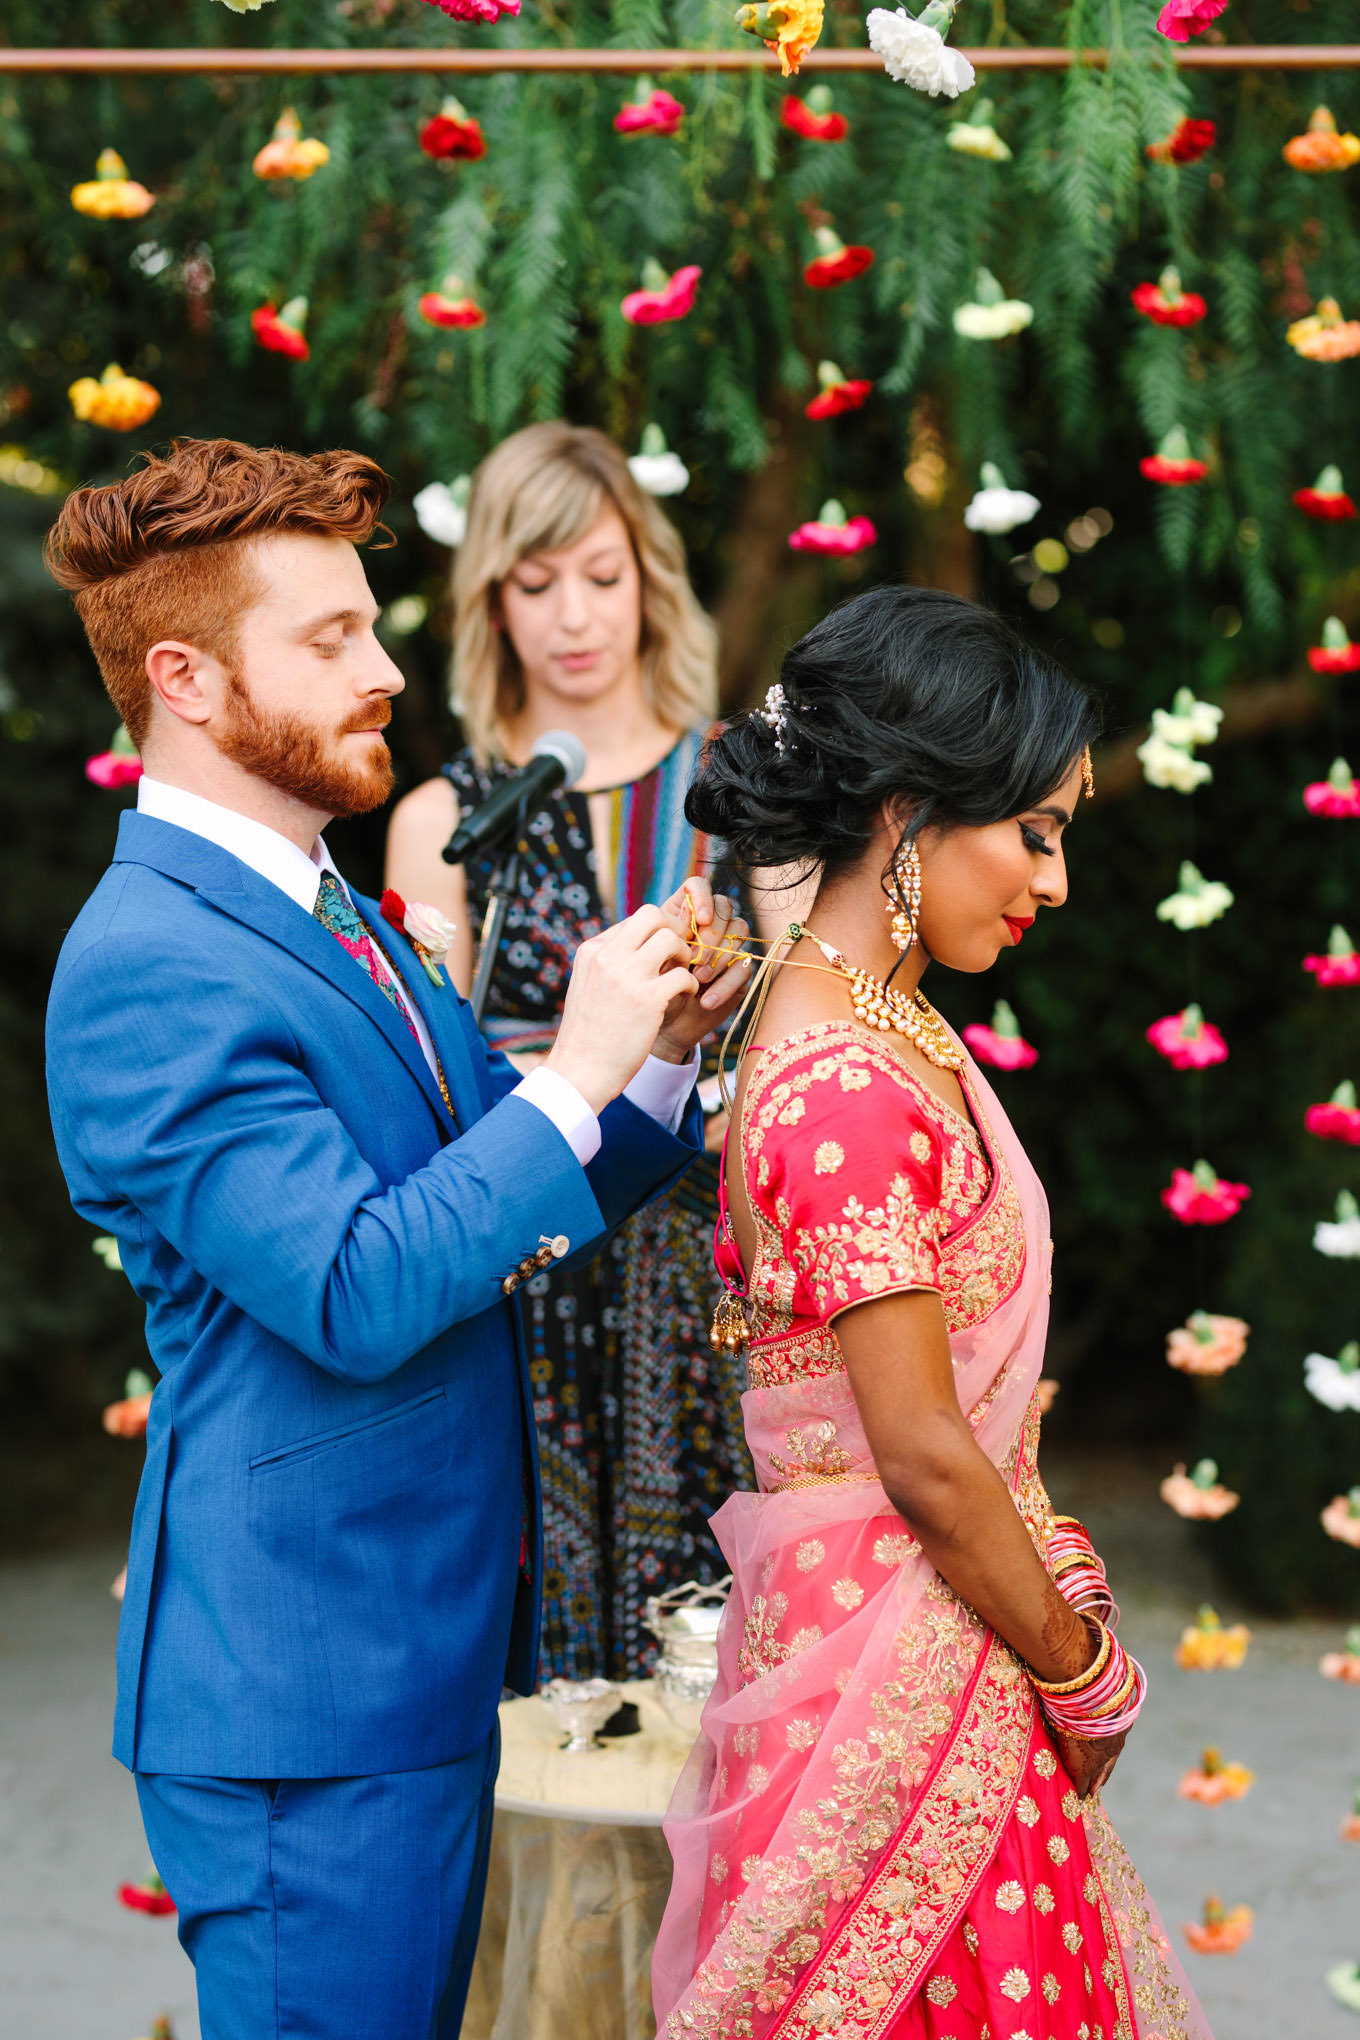 Groom putting necklace on bride during wedding ceremony. Two Disney artists create a unique and colorful Indian Fusion wedding at The Fig House Los Angeles, featured on Green Wedding Shoes. | Colorful and elevated wedding inspiration for fun-loving couples in Southern California | #indianwedding #indianfusionwedding #thefighouse #losangeleswedding   Source: Mary Costa Photography | Los Angeles